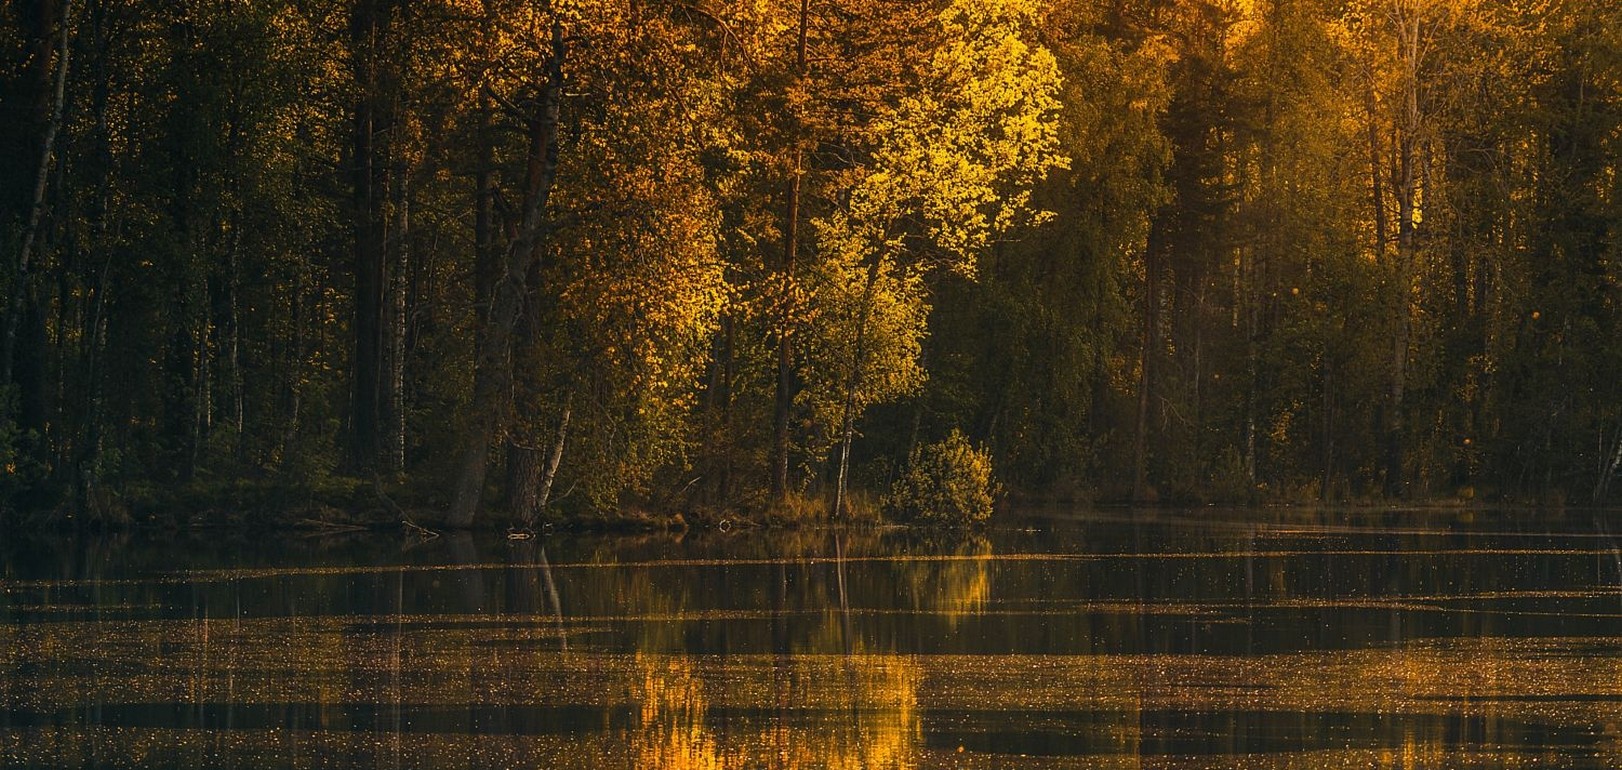 General 1622x770 photography landscape nature lake forest fall trees reflection calm waters sunset yellow leaves warm colors